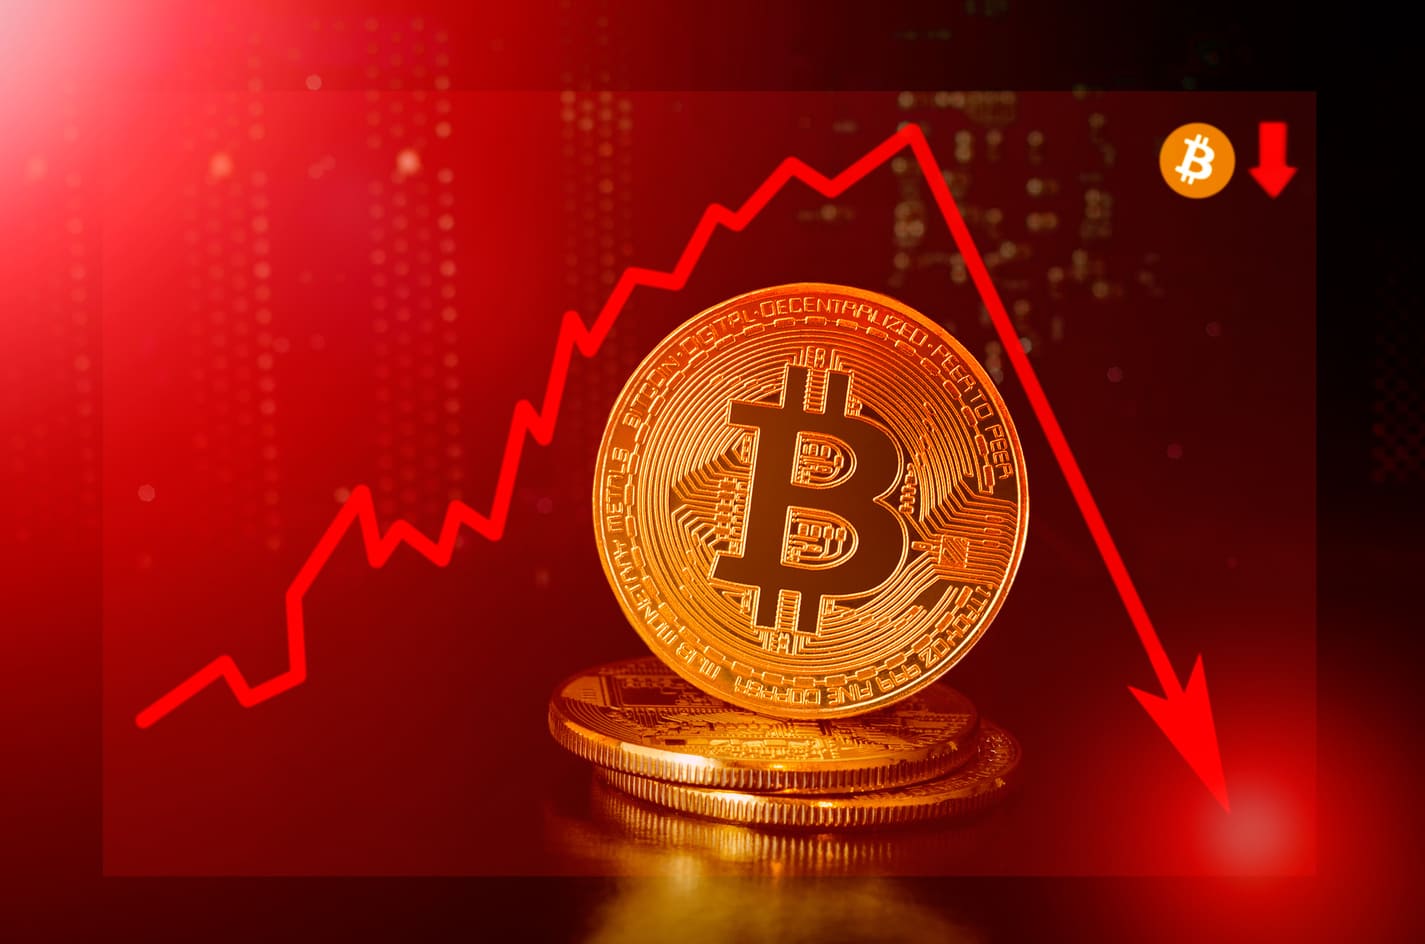 The Price of Bitcoin Drops to Below $40K